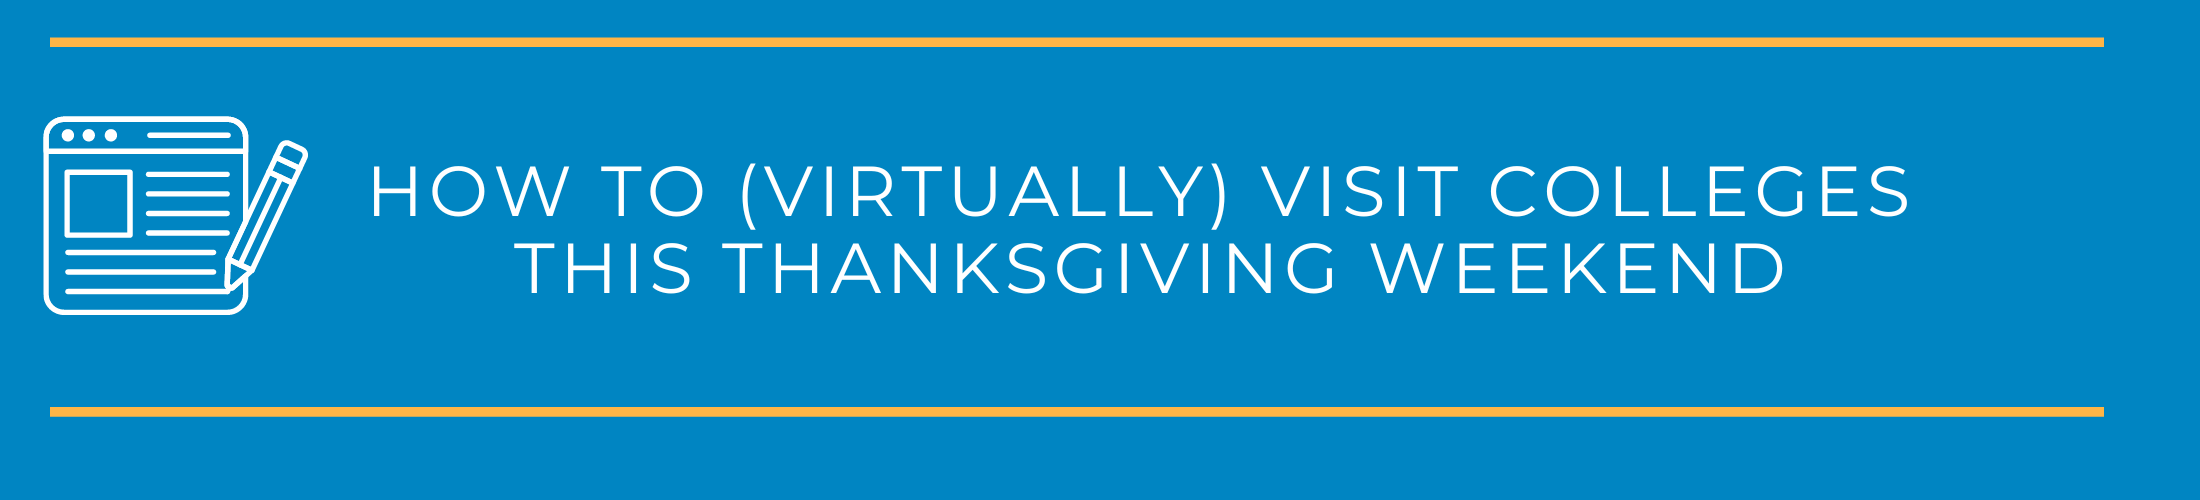 How to (Virtually) Visit Colleges This Thanksgiving Weekend